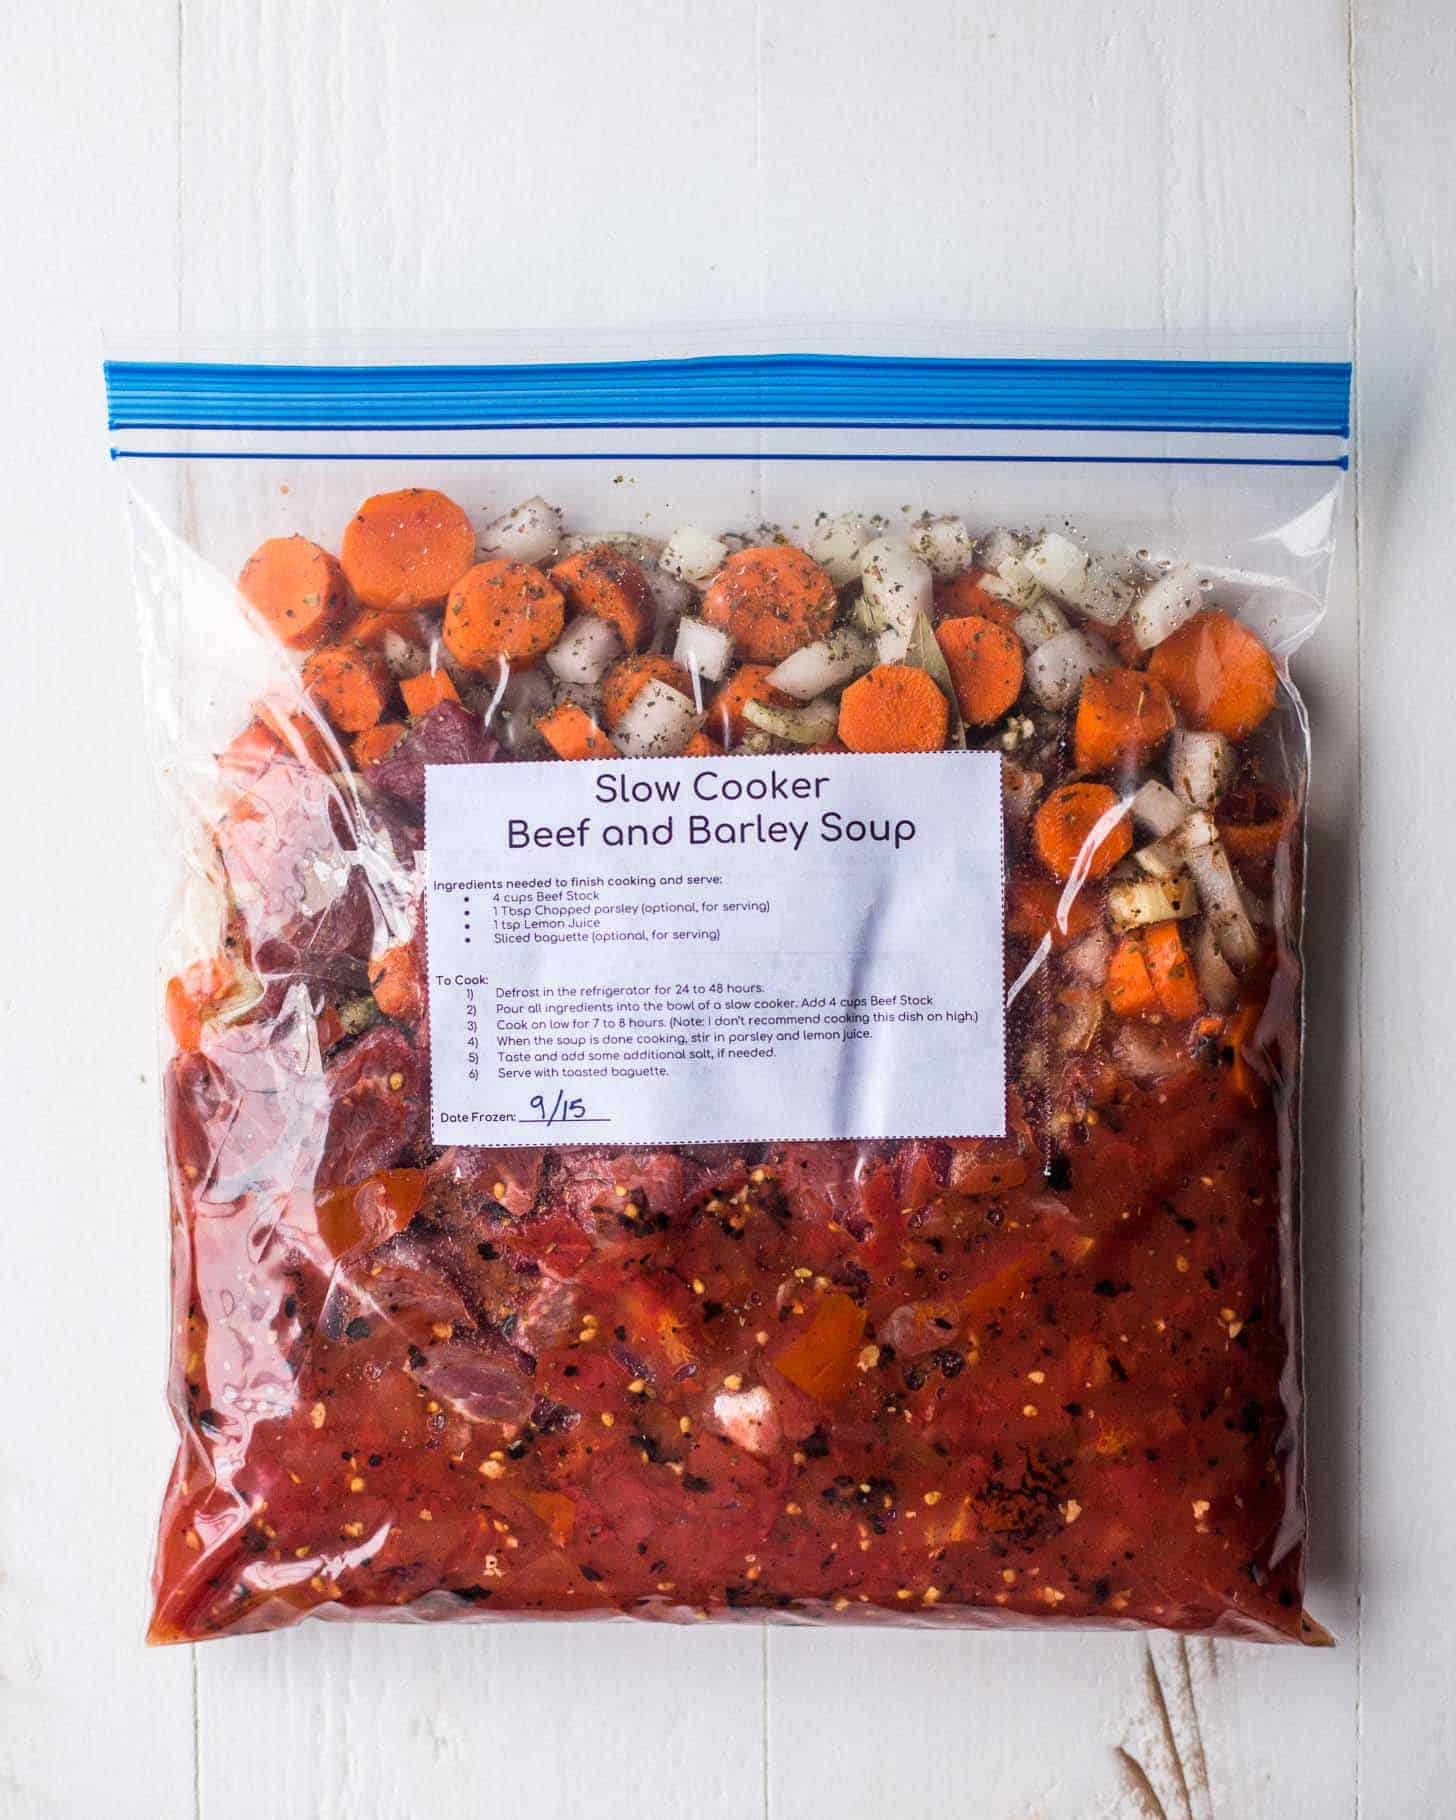 Slow cooker beef and barley soup in a freezer bag